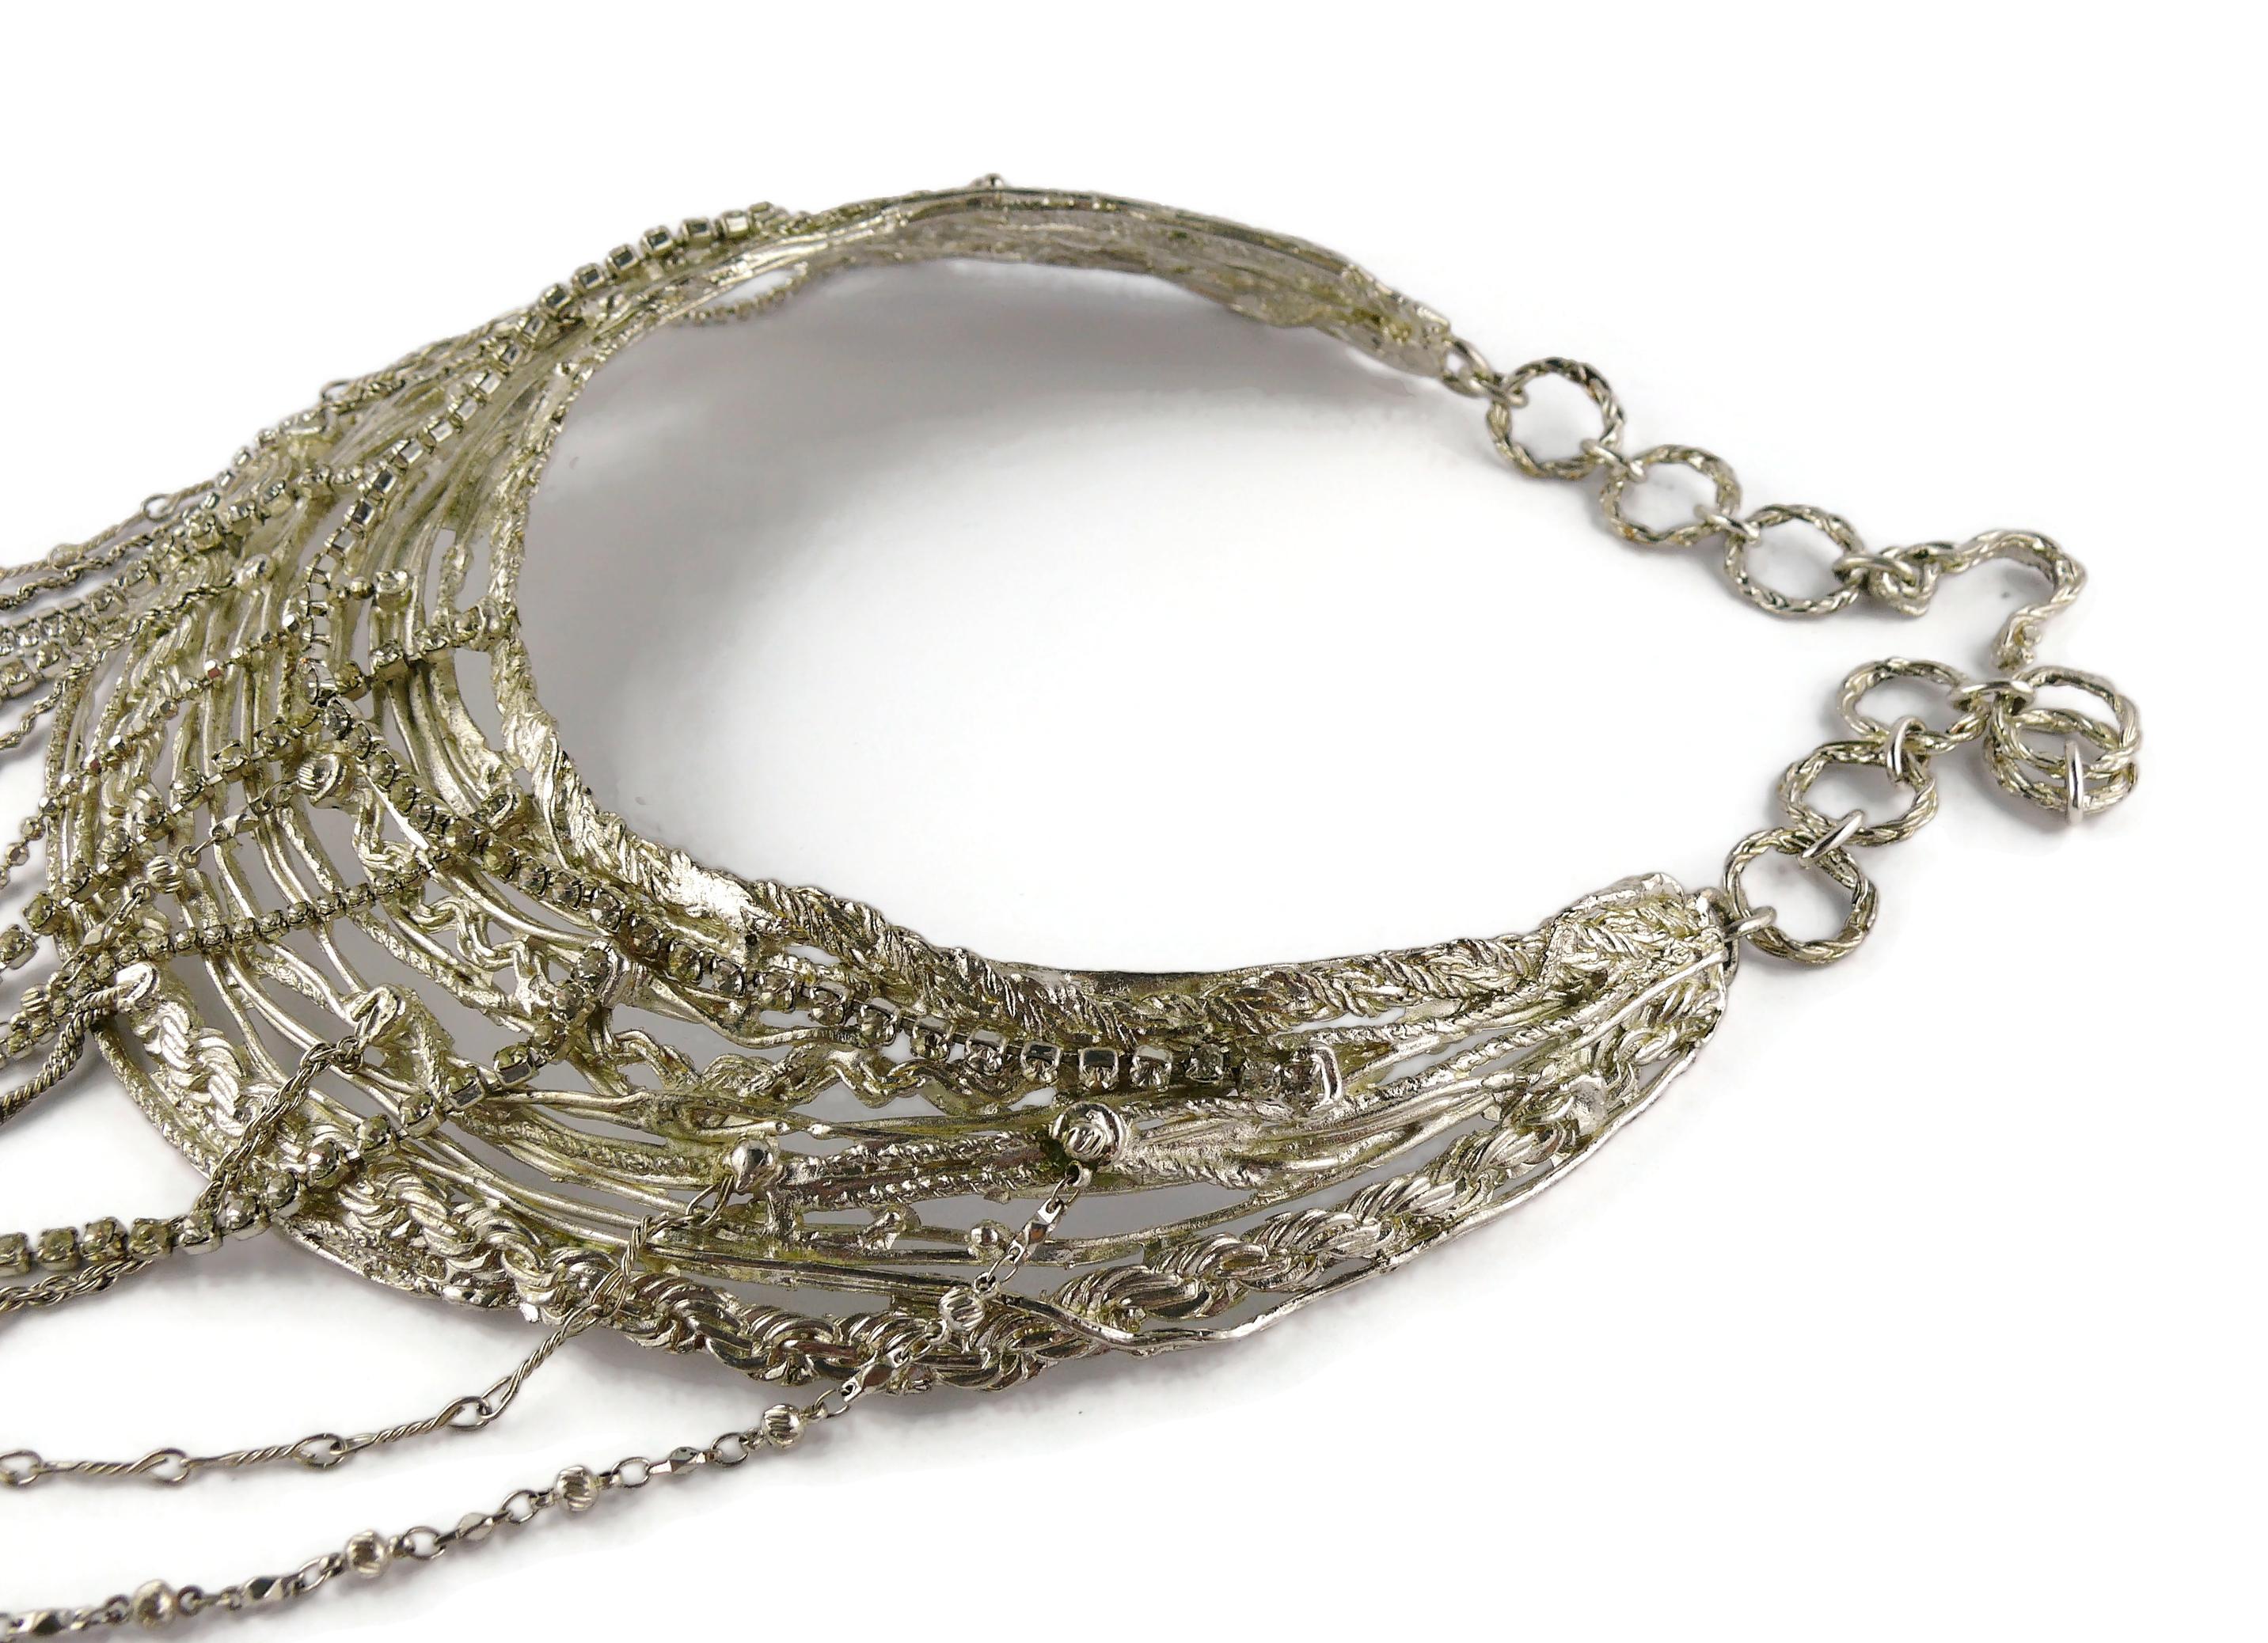 Christian Lacroix Vintage Jewelled Silver Toned Bib Necklace For Sale 4